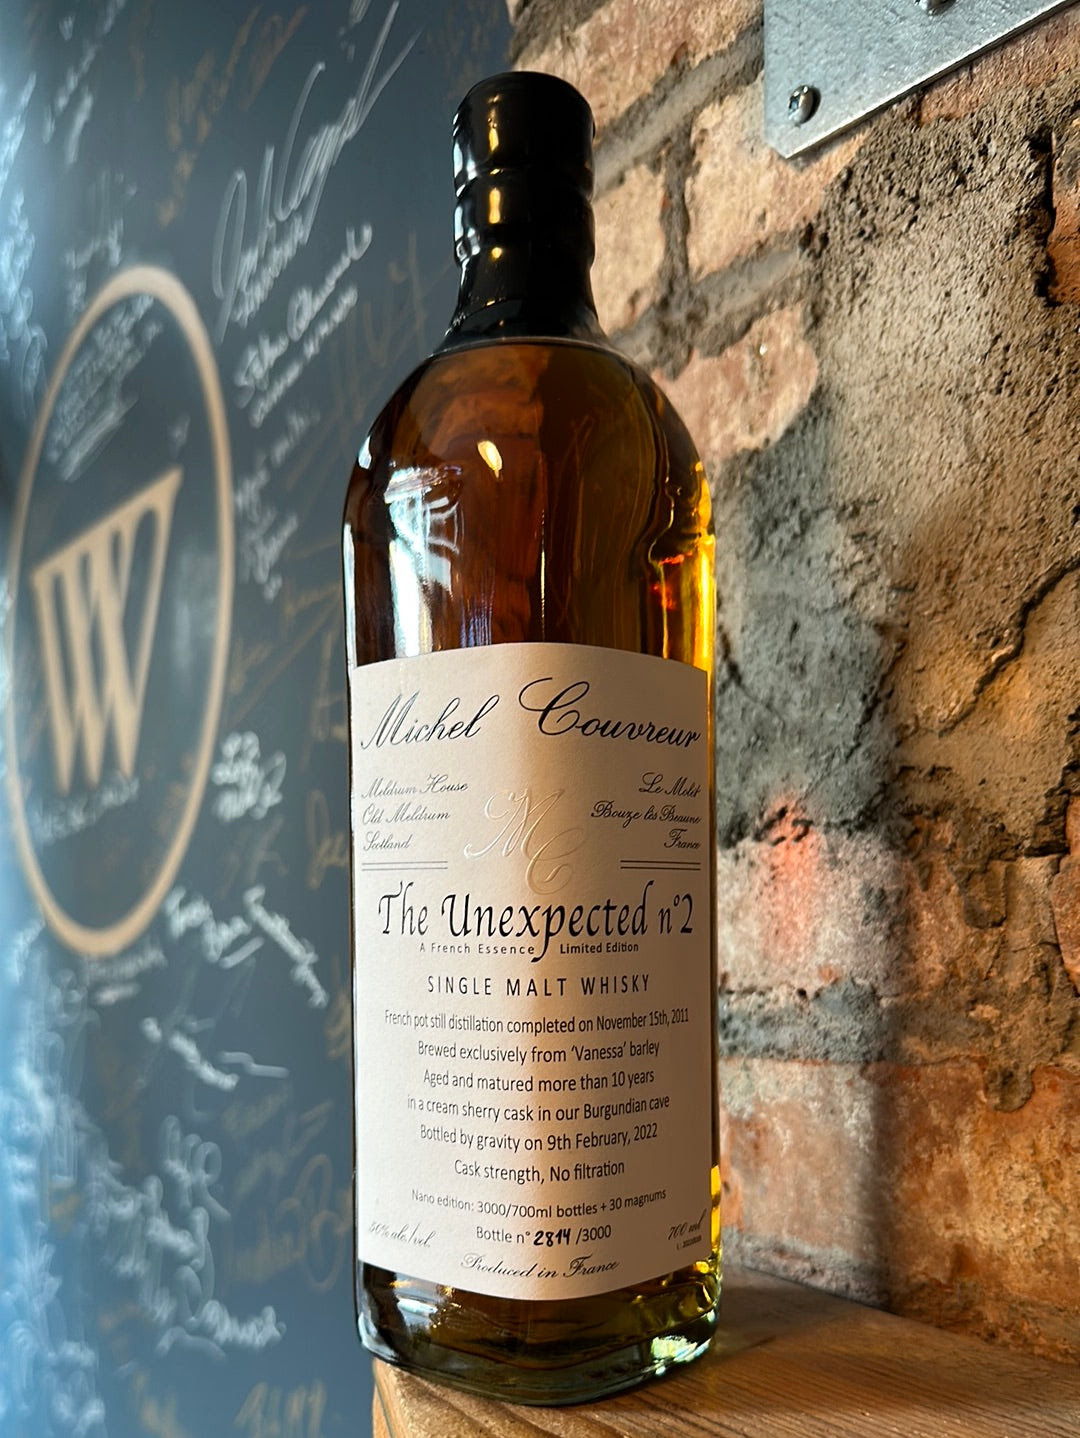 Image of Michel Couvreur 'The Unexpected' No. 2 Single Malt Whisky